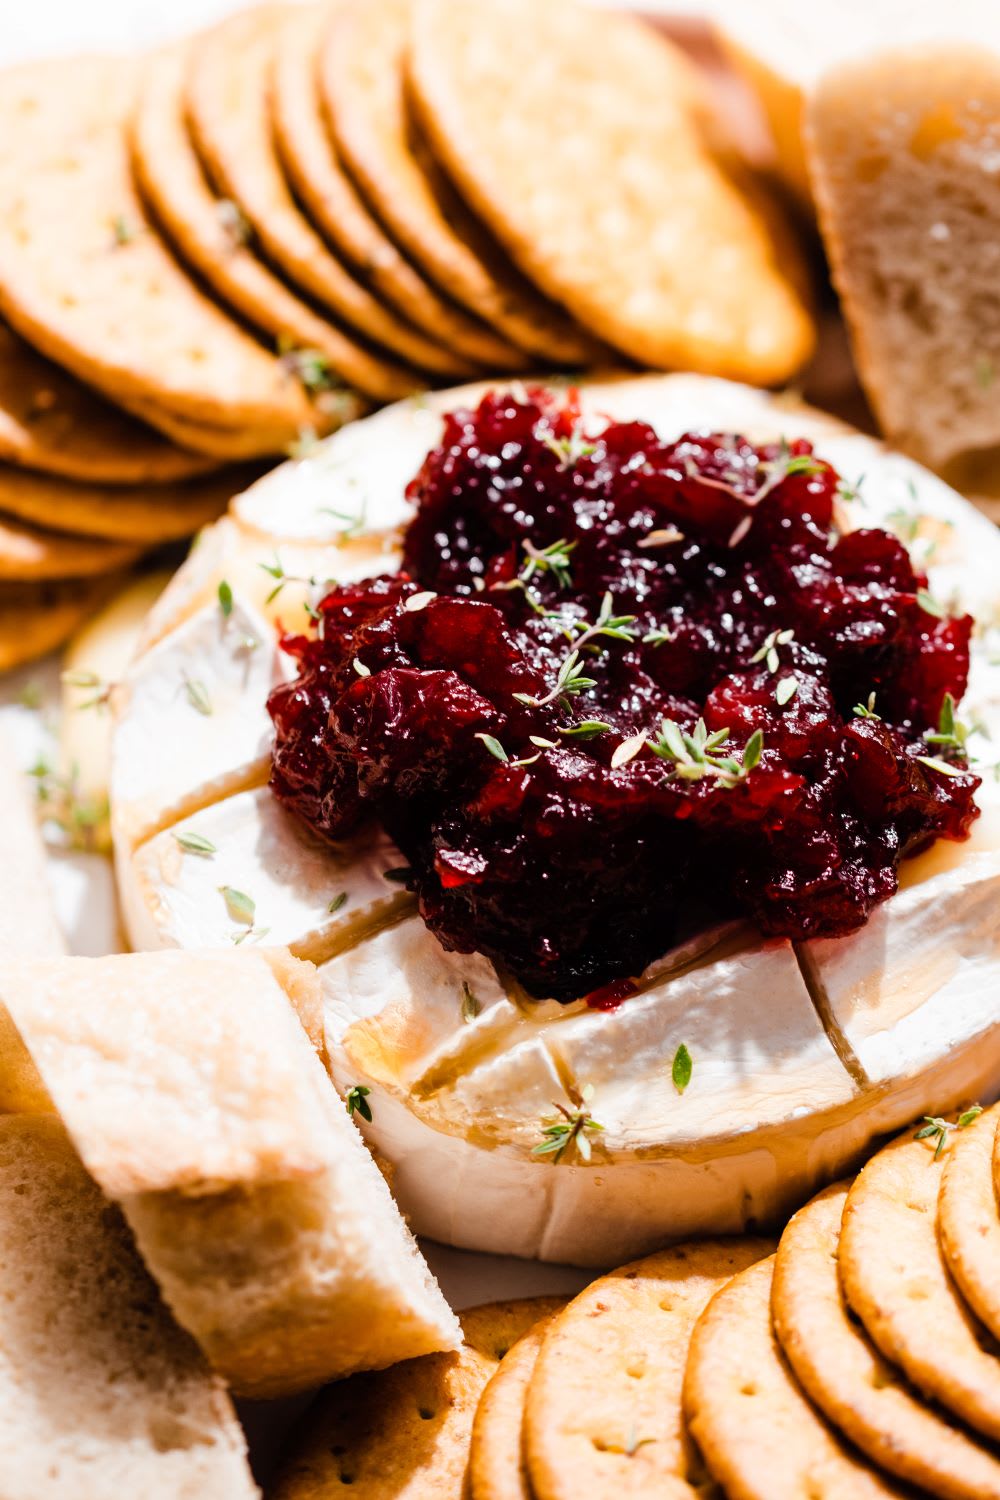 How To Make Baked Brie With Cranberry - Lulus.com Fashion Blog